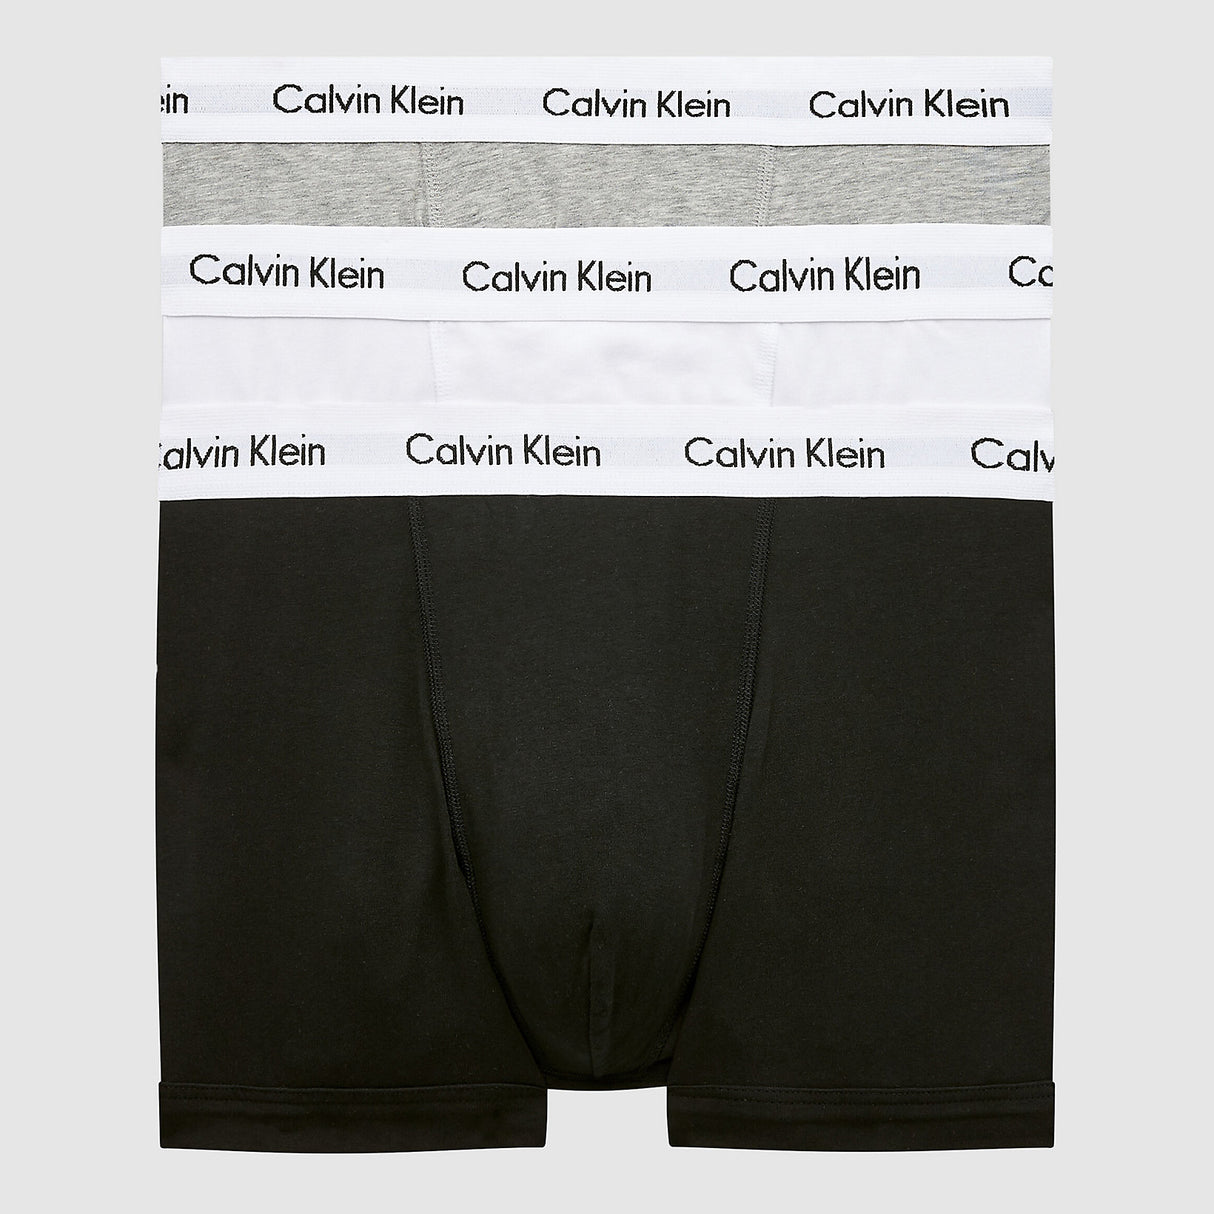 Calvin Klein Men's 3 Pack Cotton Stretch Low Rise Trunks in Black/White/Grey